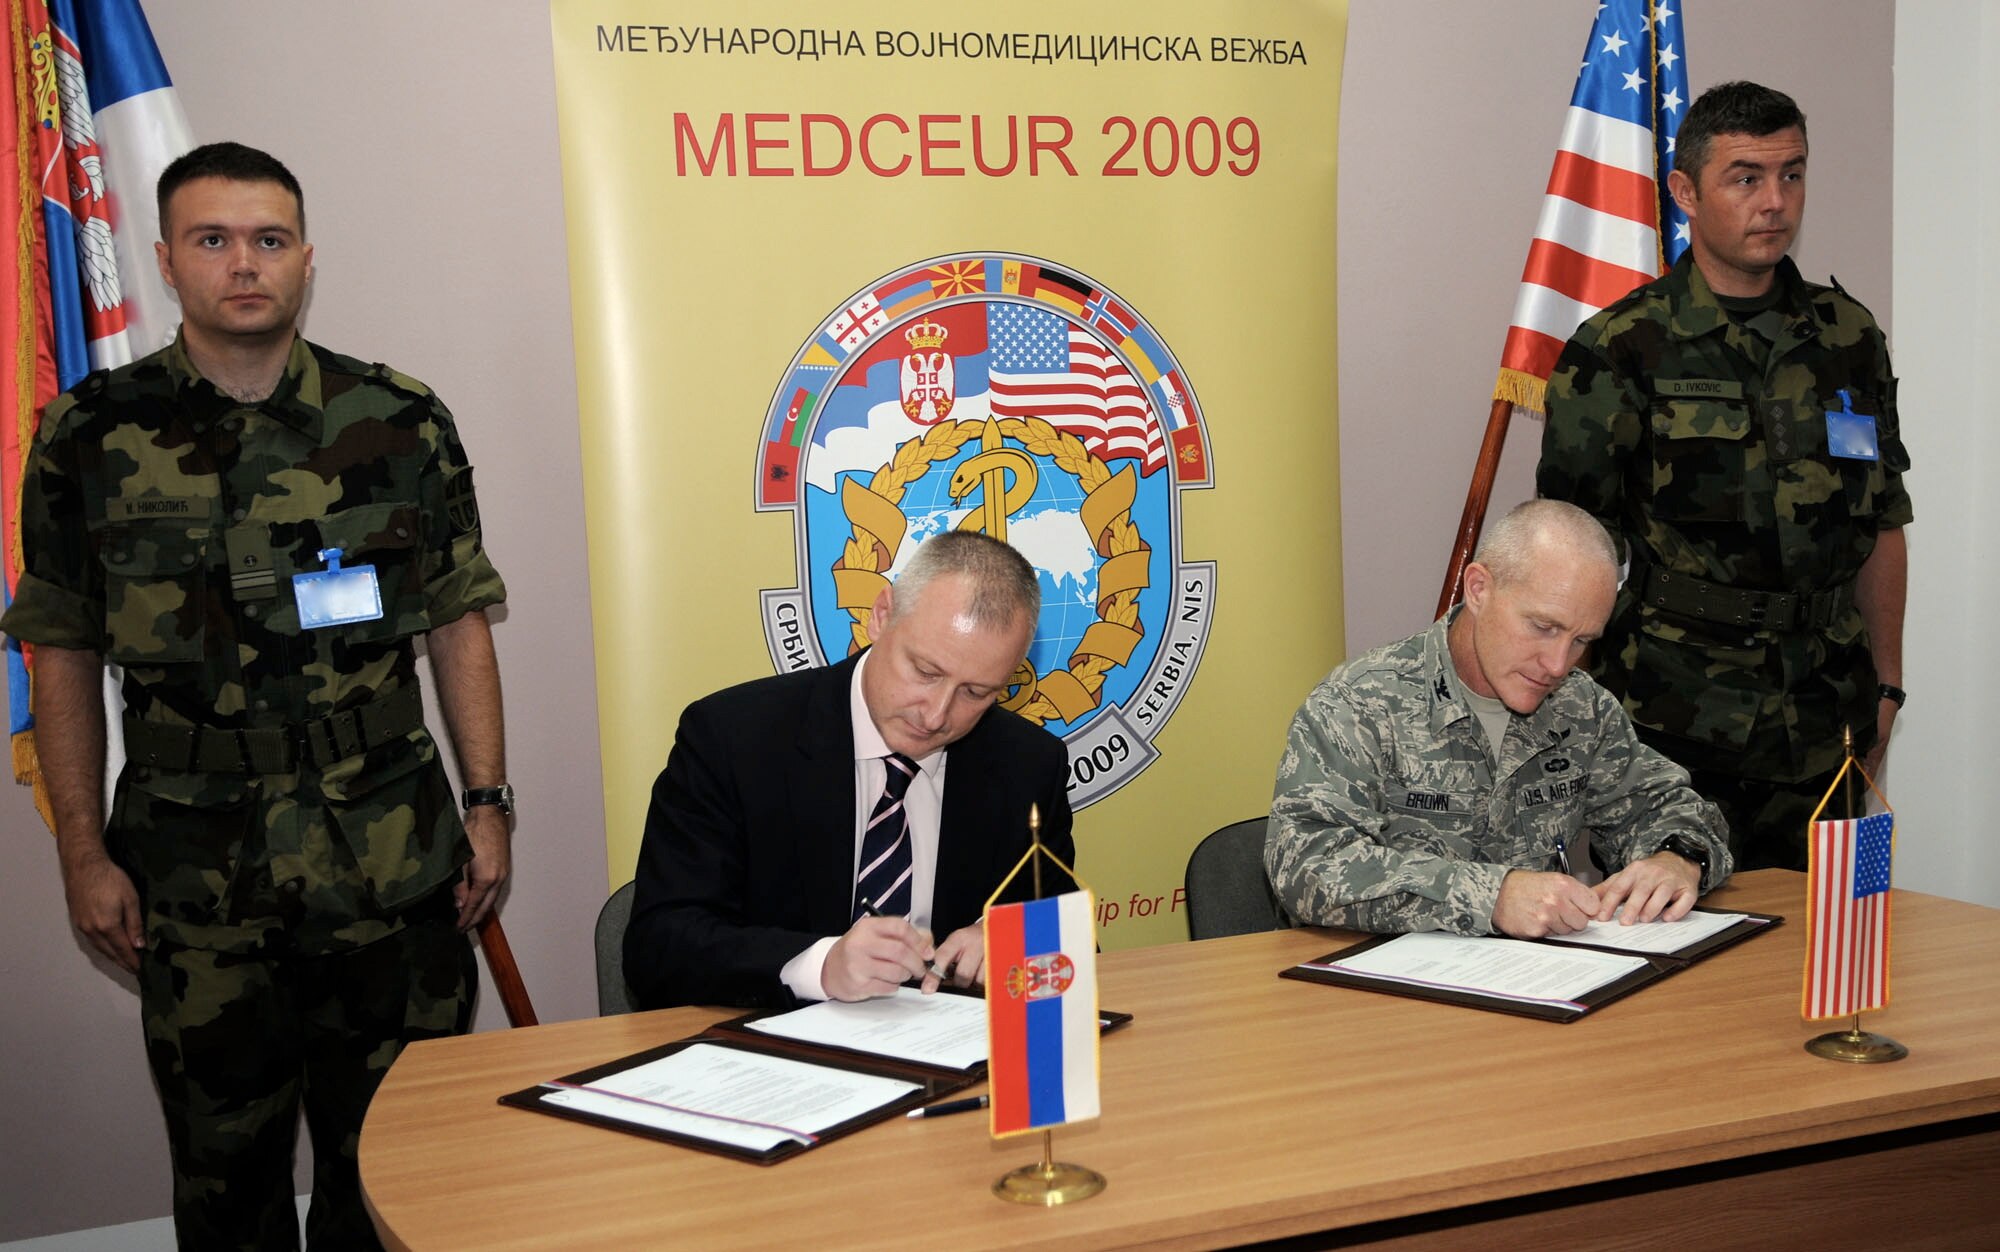 NIS, Serbia – Col. Tim Brown, 435th Expeditionary Contingency Response Group commander and MEDCEUR 2009 co-director, and Dr. Zoran Vesic, a Serbian state secretary, officially signs the event memorandum and technical agreement before the opening ceremony of the 2009 military medical training exercise in Central and Eastern Europe Wednesday, Sept. 2, 2009 at Knjaz Mihailo Barracks here. More than 600 participants, including hundreds of Unites States Air Forces in Europe Airmen, descended upon Nis to participate in the Sept. 2 - 13 exercise. The exercise focuses on providing joint medical training and assisting host nation civilian and military services; international, private and volunteer organizations; and other participating nations in enhancing disaster response actions.